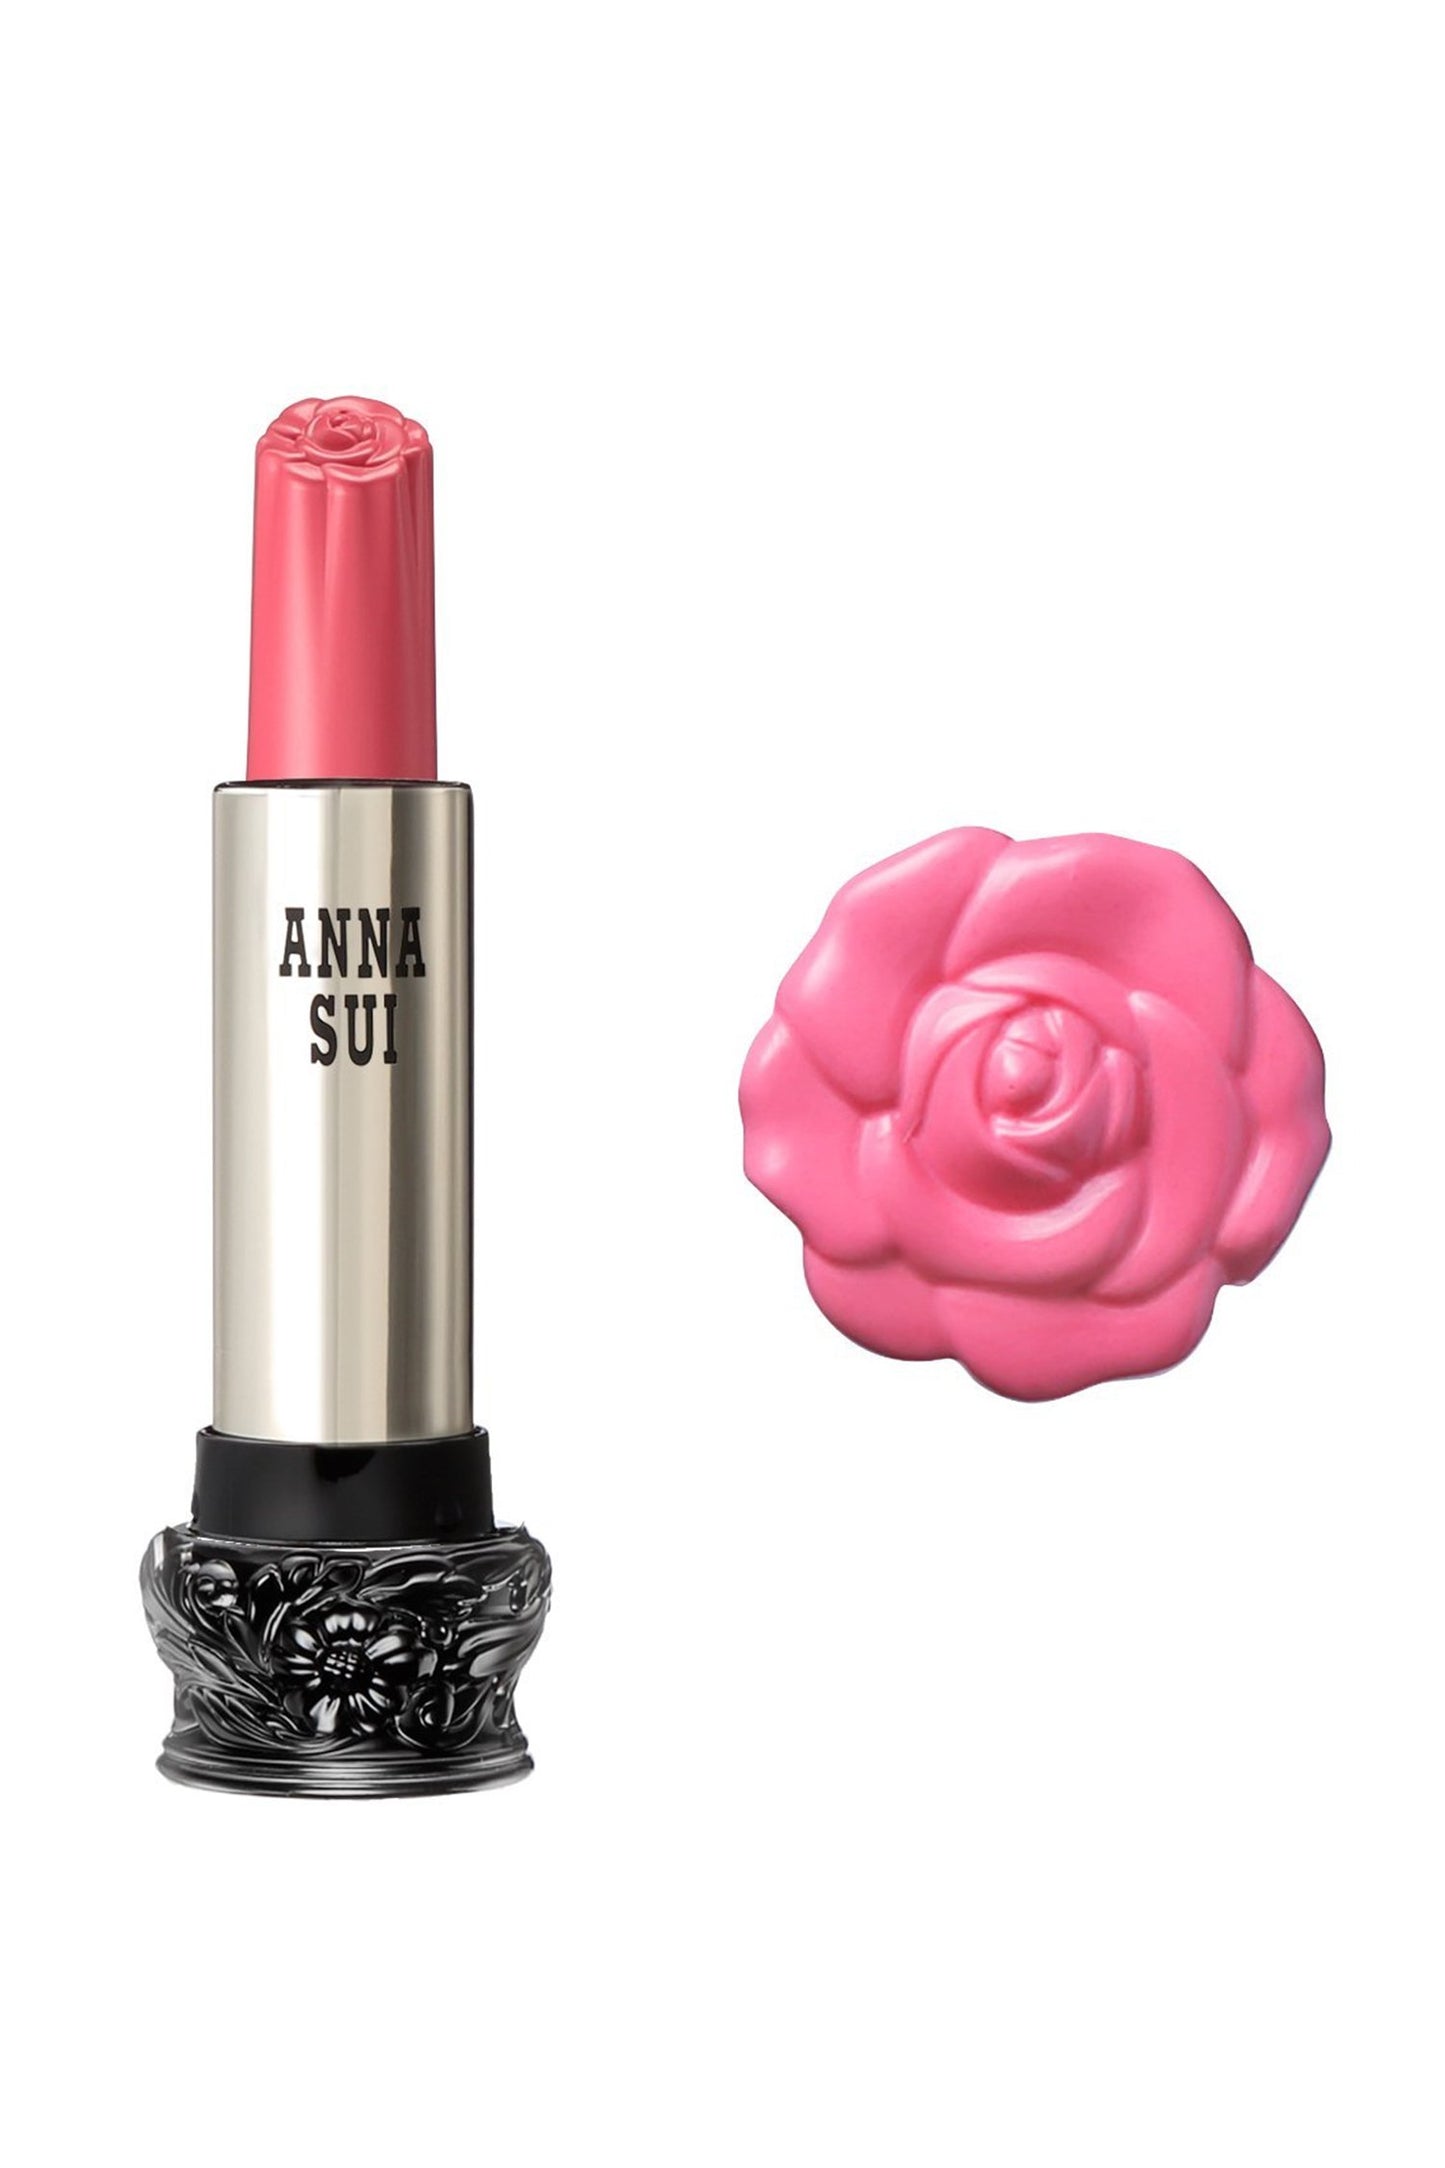 300 - Pale Pink Peony Lipstick F: Fairy Flower, in a cylindrical container, large black base, engraved floral design, metallic body